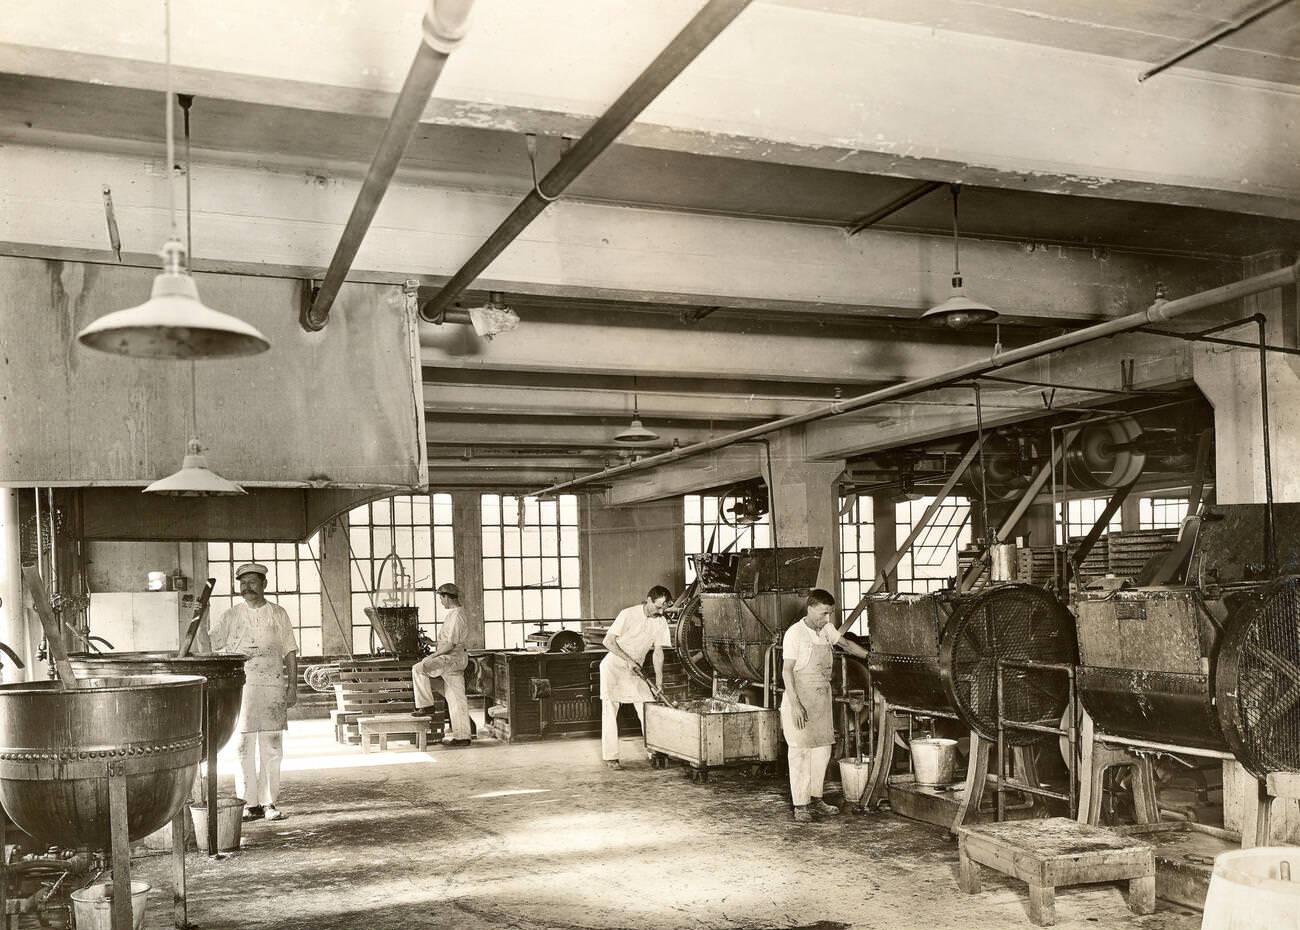 Preparing Centers For Delatour Chocolates At E. Greenfield'S Sons, Brooklyn, 1917-1919.